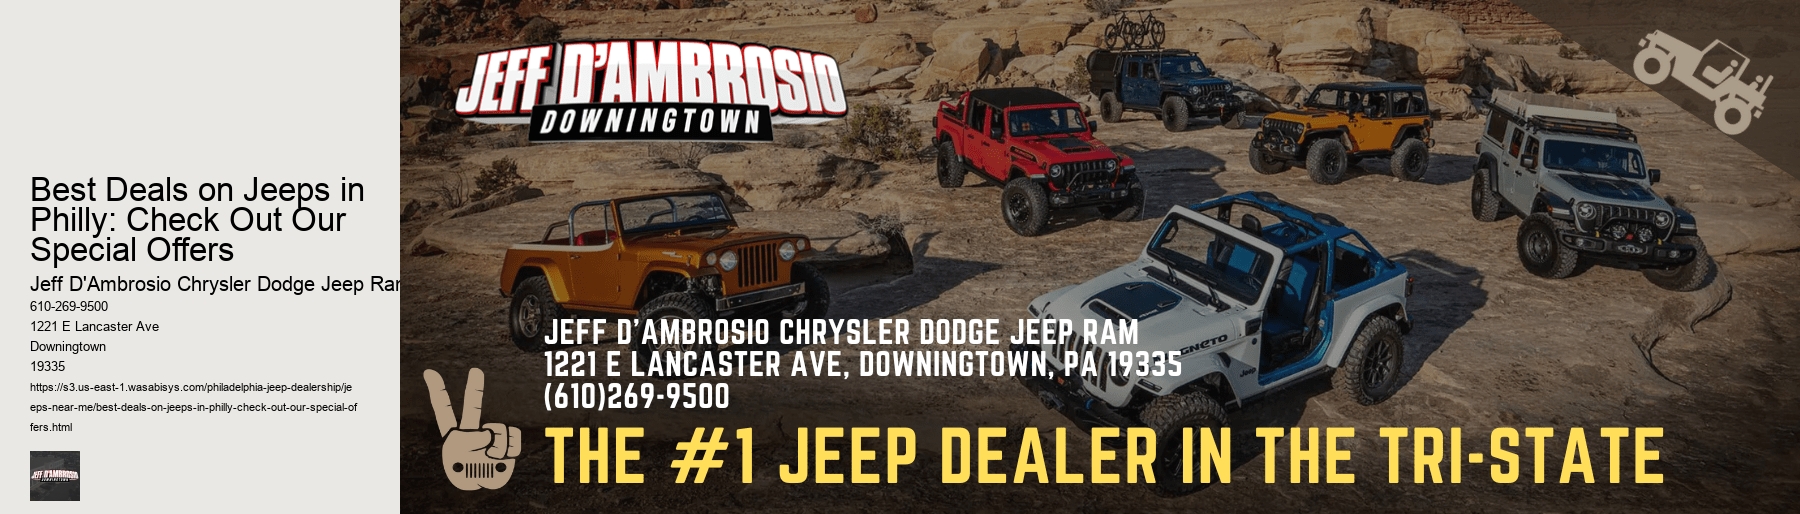 Best Deals on Jeeps in Philly: Check Out Our Special Offers